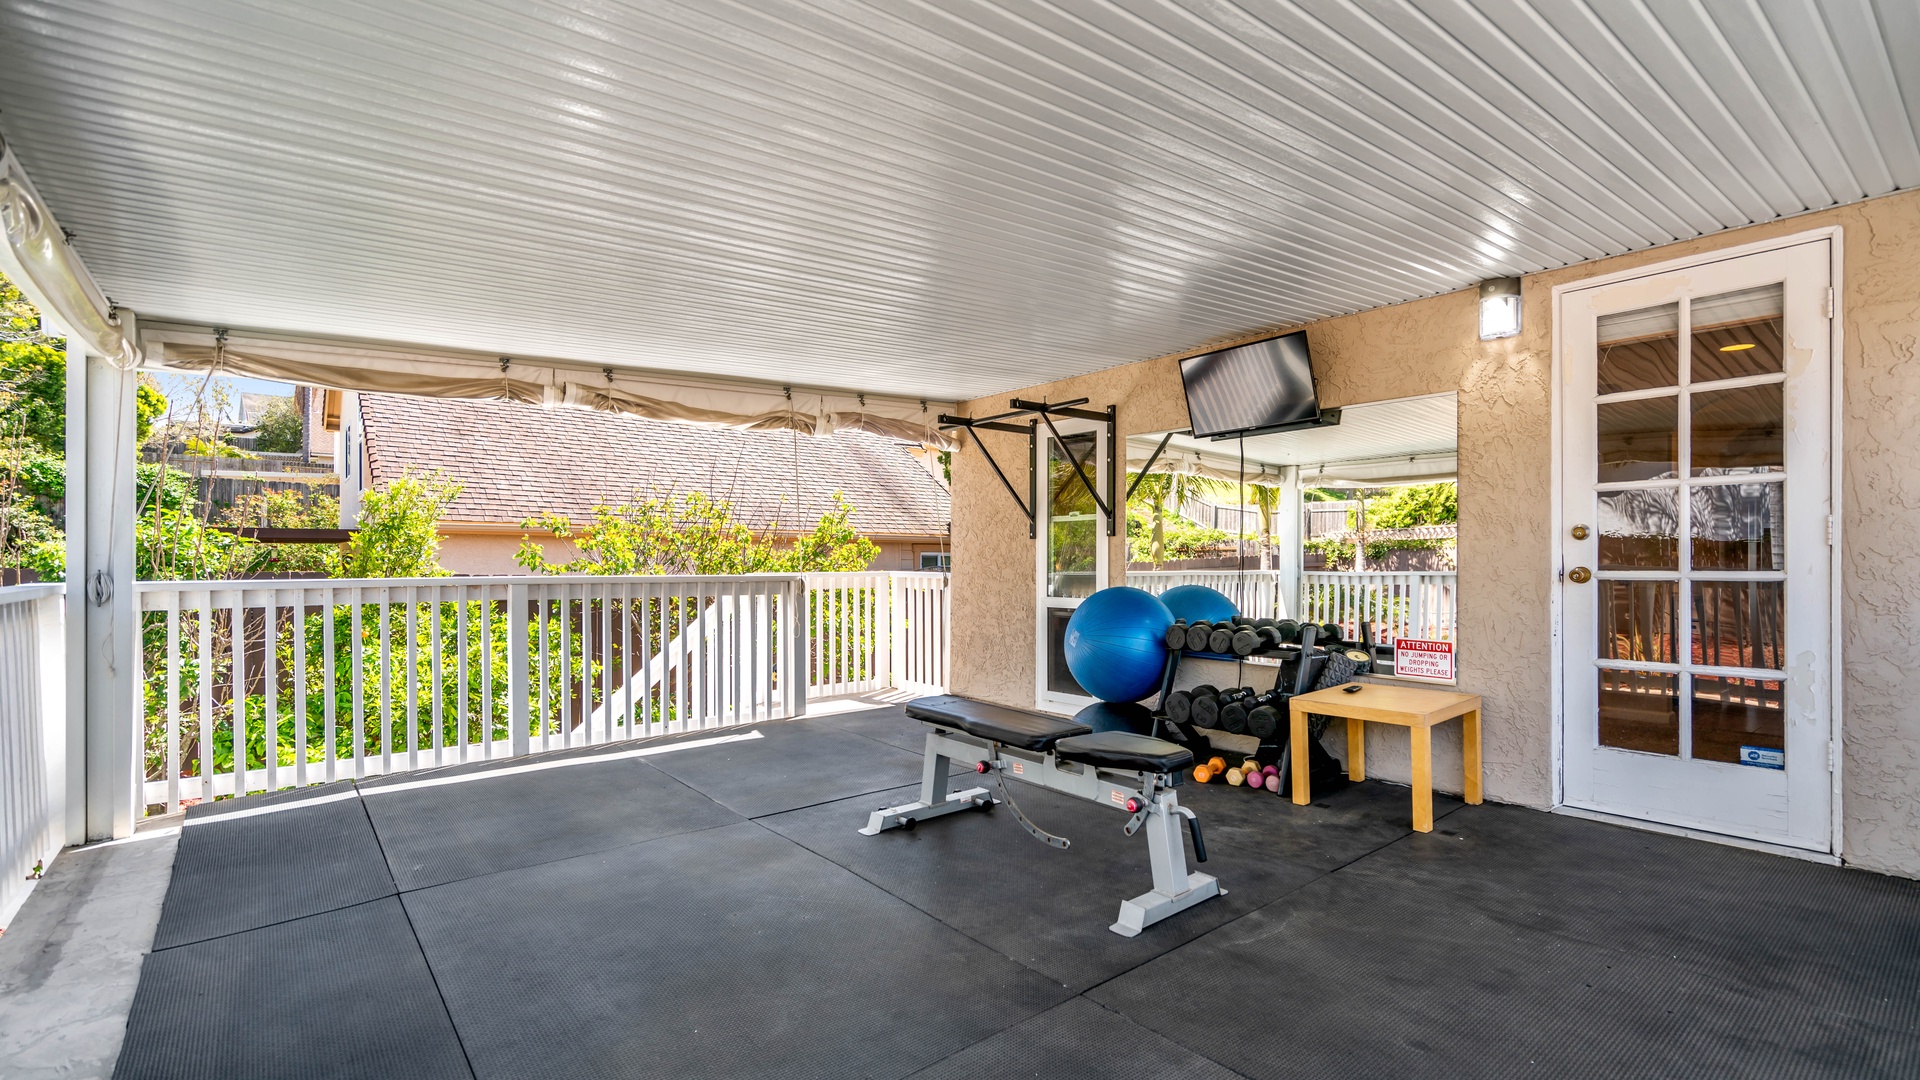 Get your workout in at the fully functional outdoor covered gym with dumbbell set, and wall-mounted pull-up bar. TV and plenty of space for functional training.